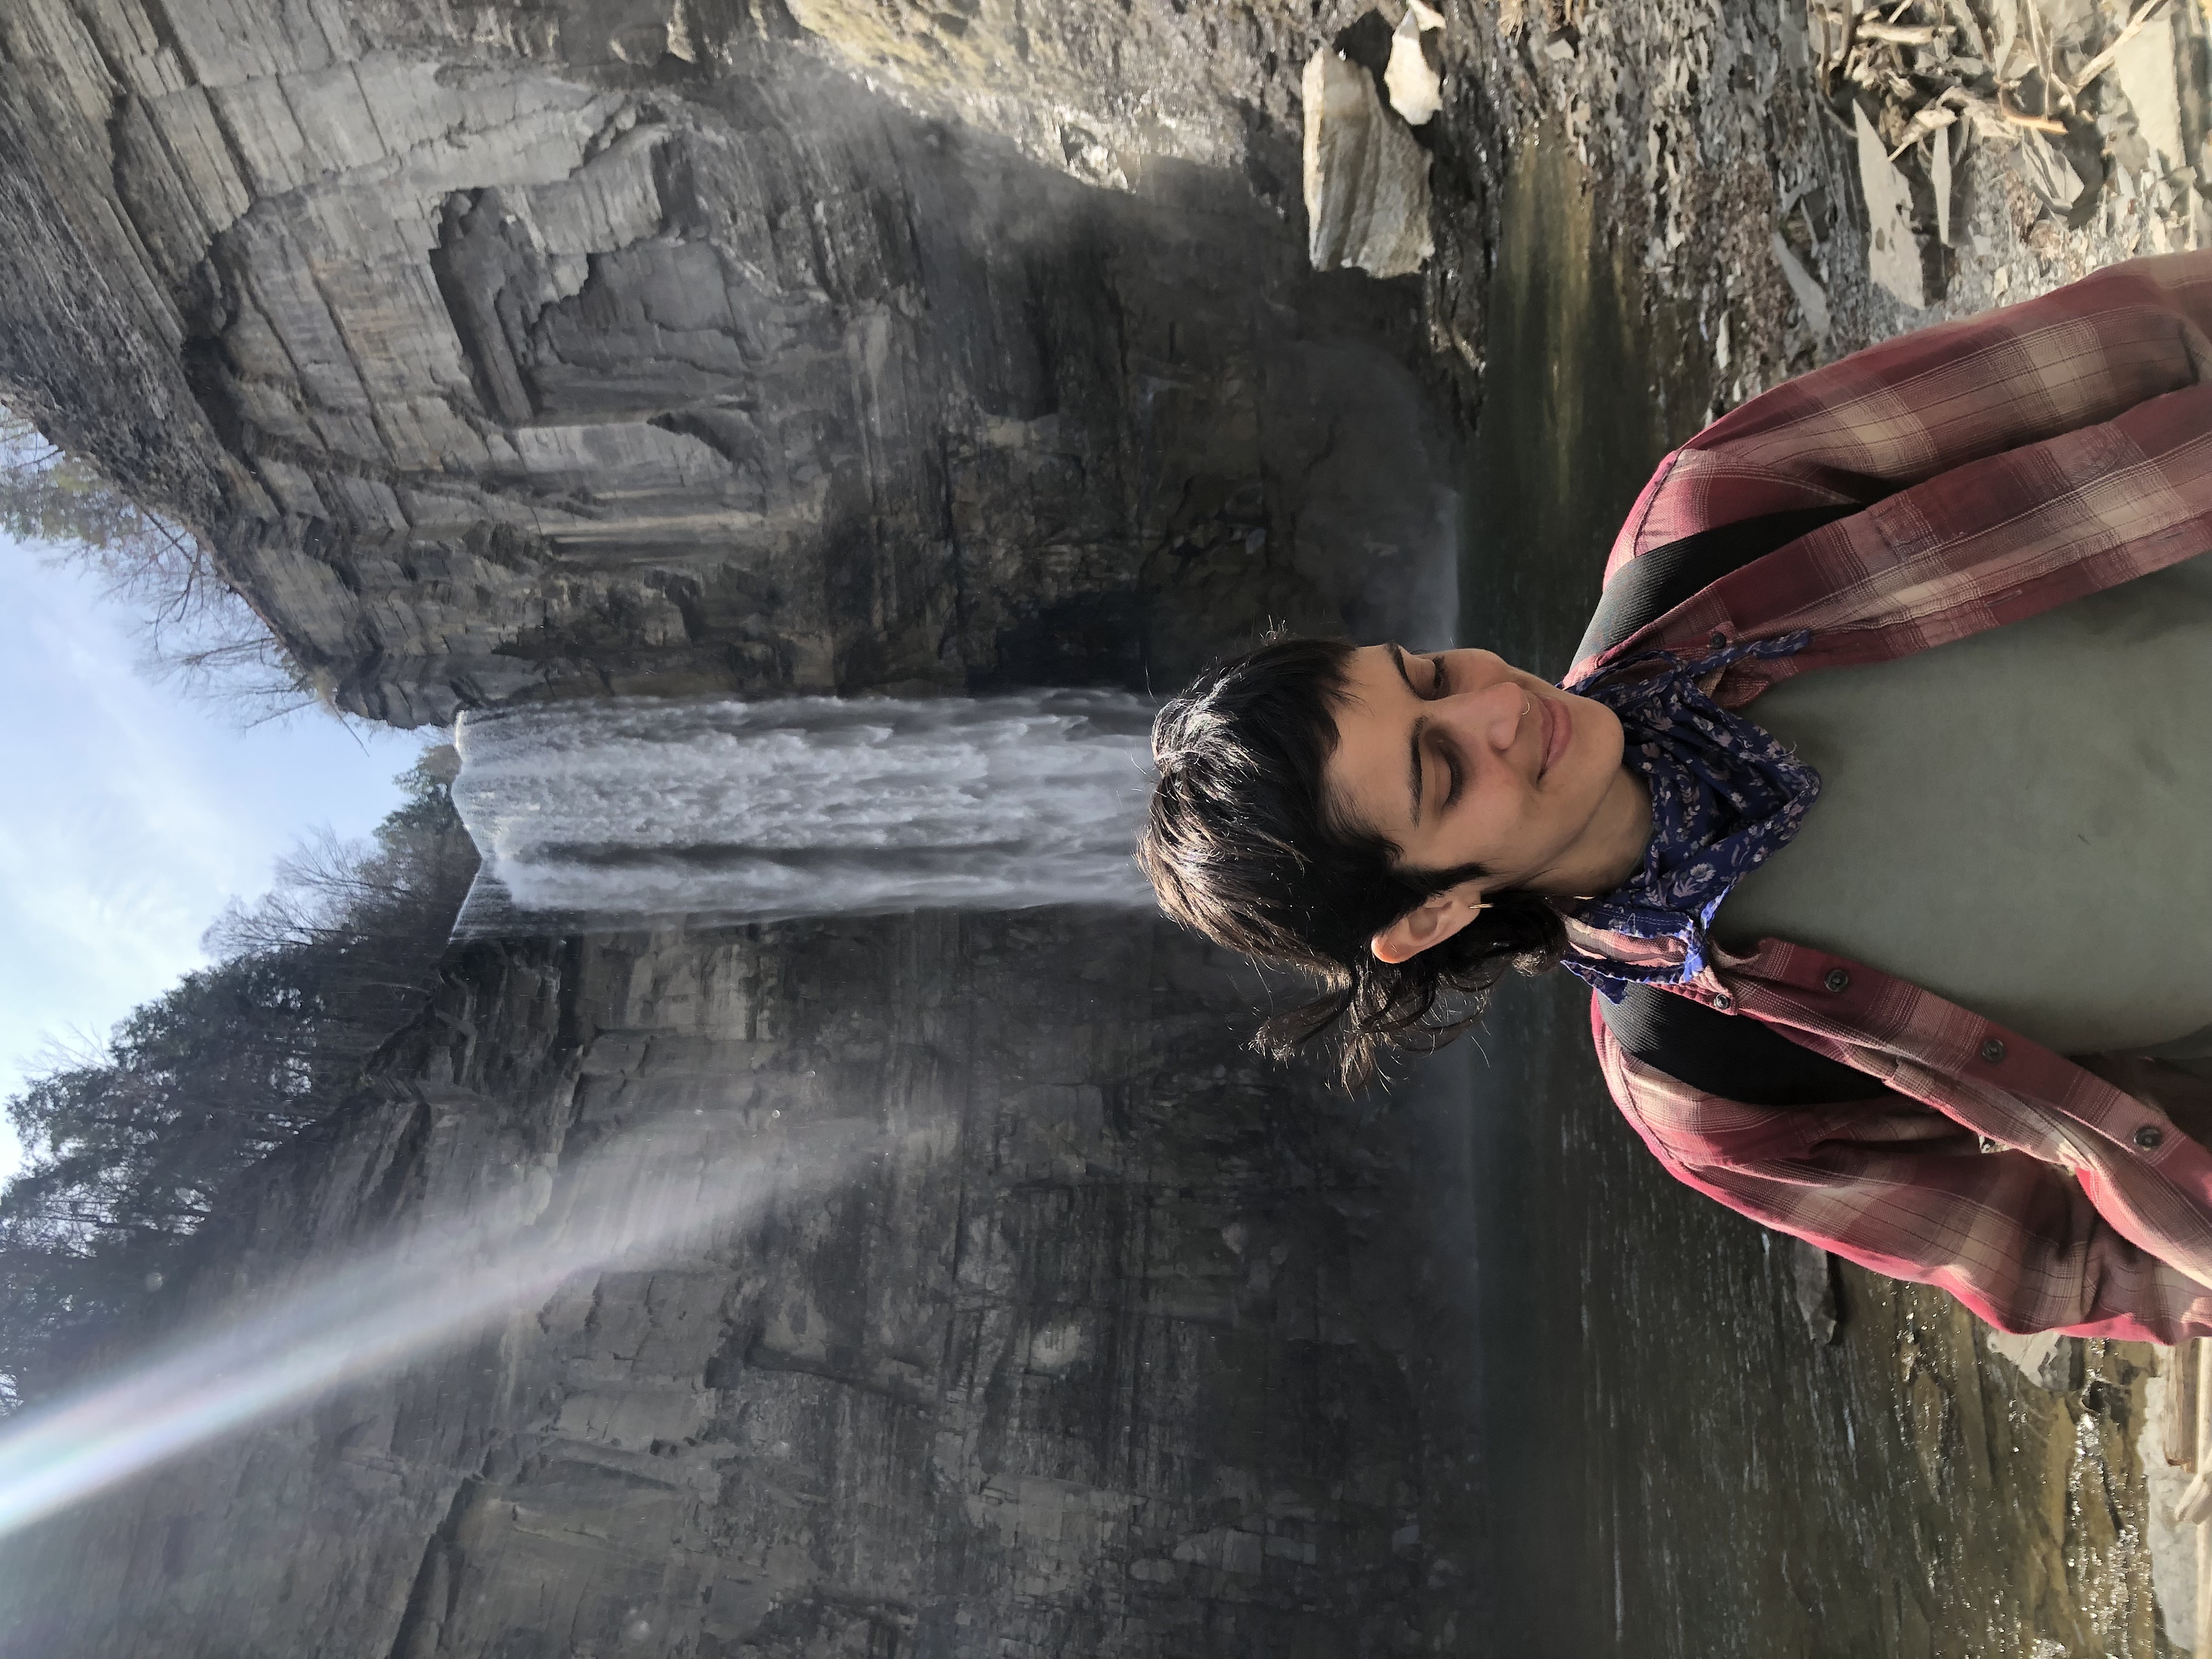 Brooke stands in front of a large waterfall in a plad shirt and a green sweatshirt. their hair blos in the wind and a sunbeam shines down from above the waterfall. 